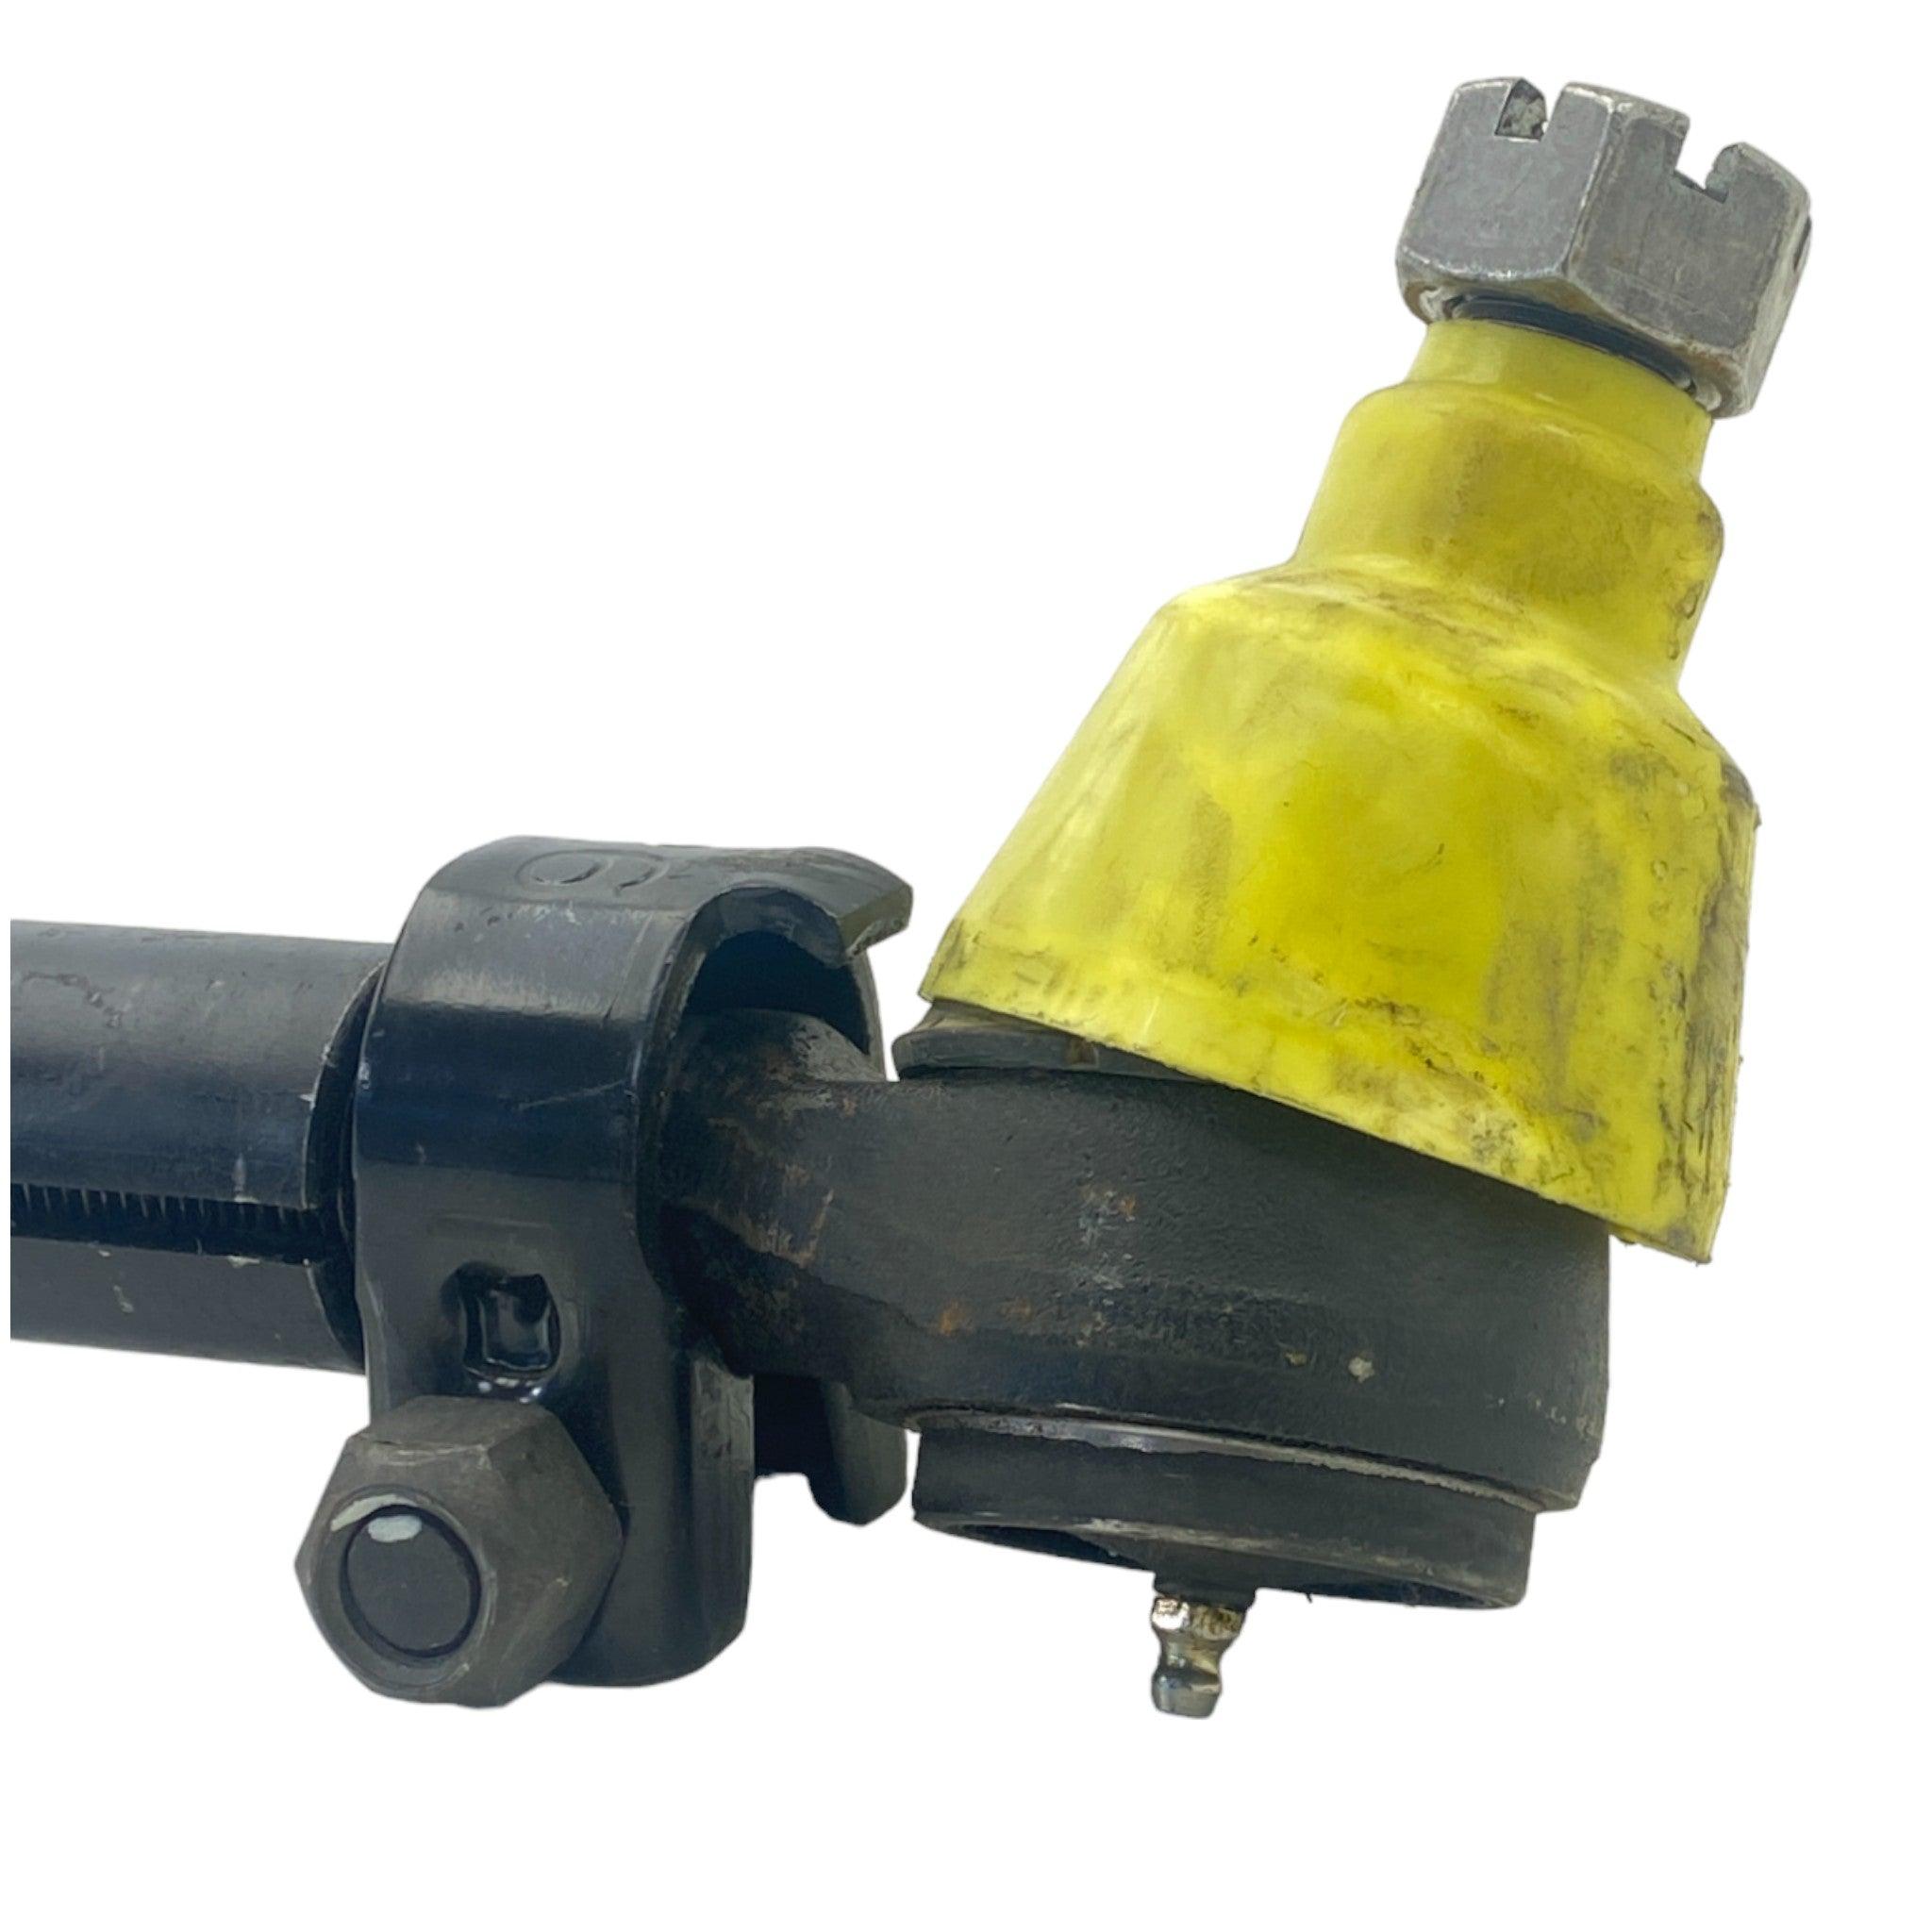 A1 3102D2890V Genuine Meritor Tie Rod End Assembly - ADVANCED TRUCK PARTS